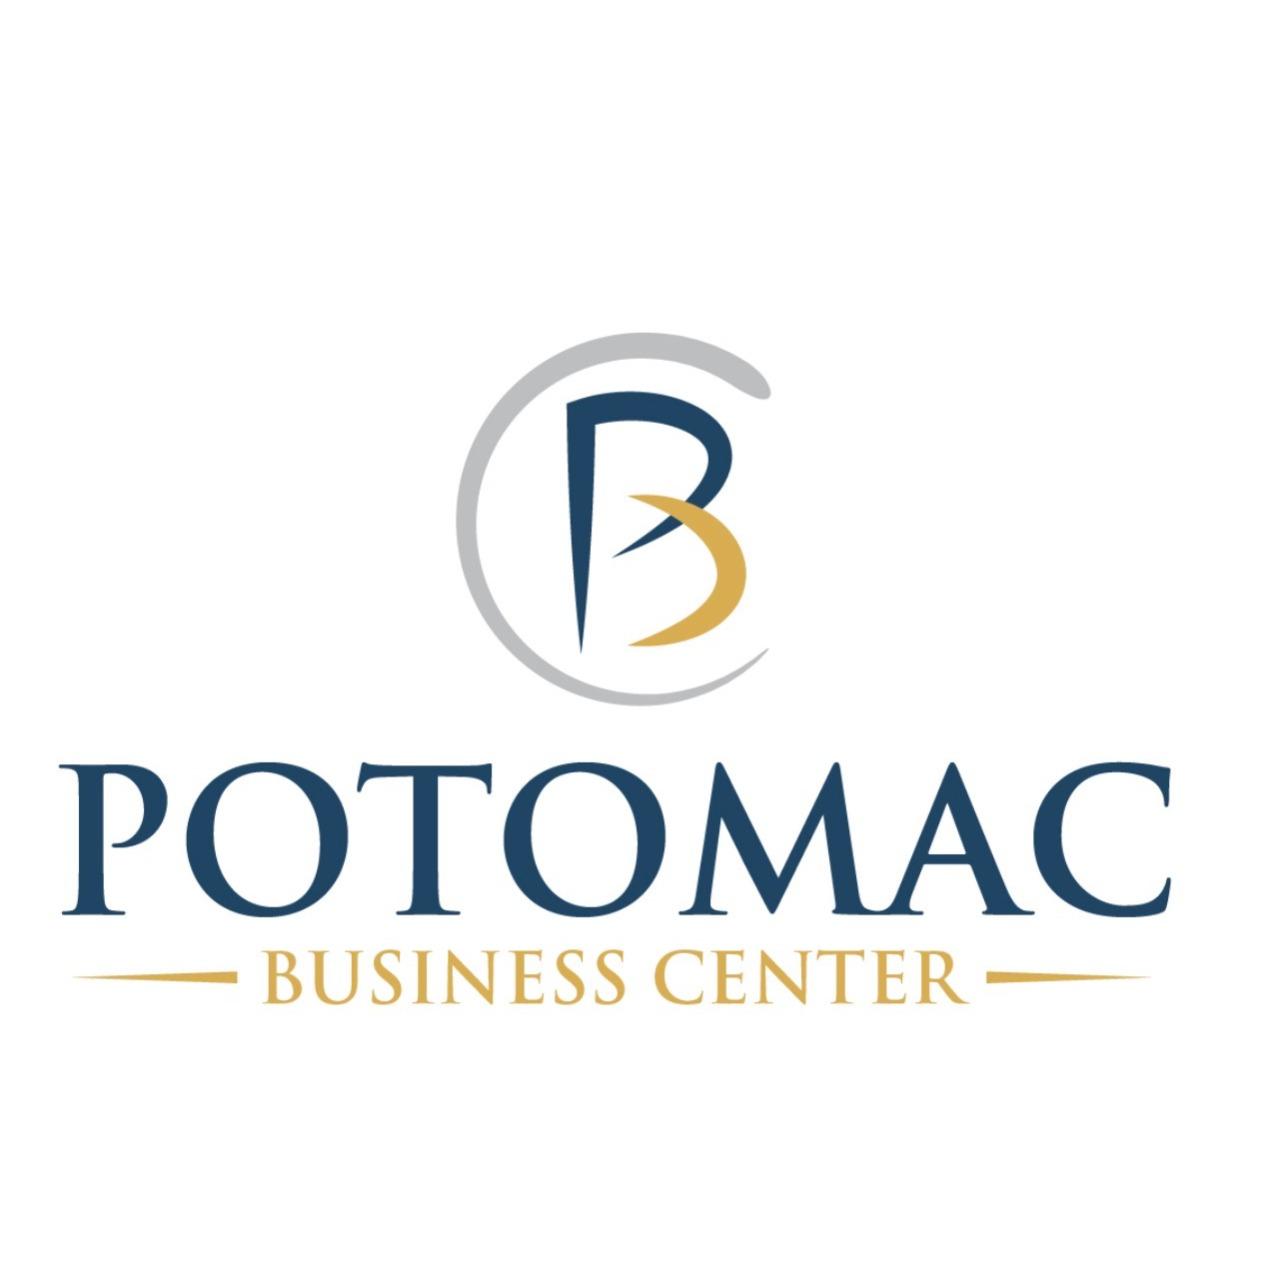 Potomac Business Center - Hagerstown, MD 21740 - (240)842-1500 | ShowMeLocal.com